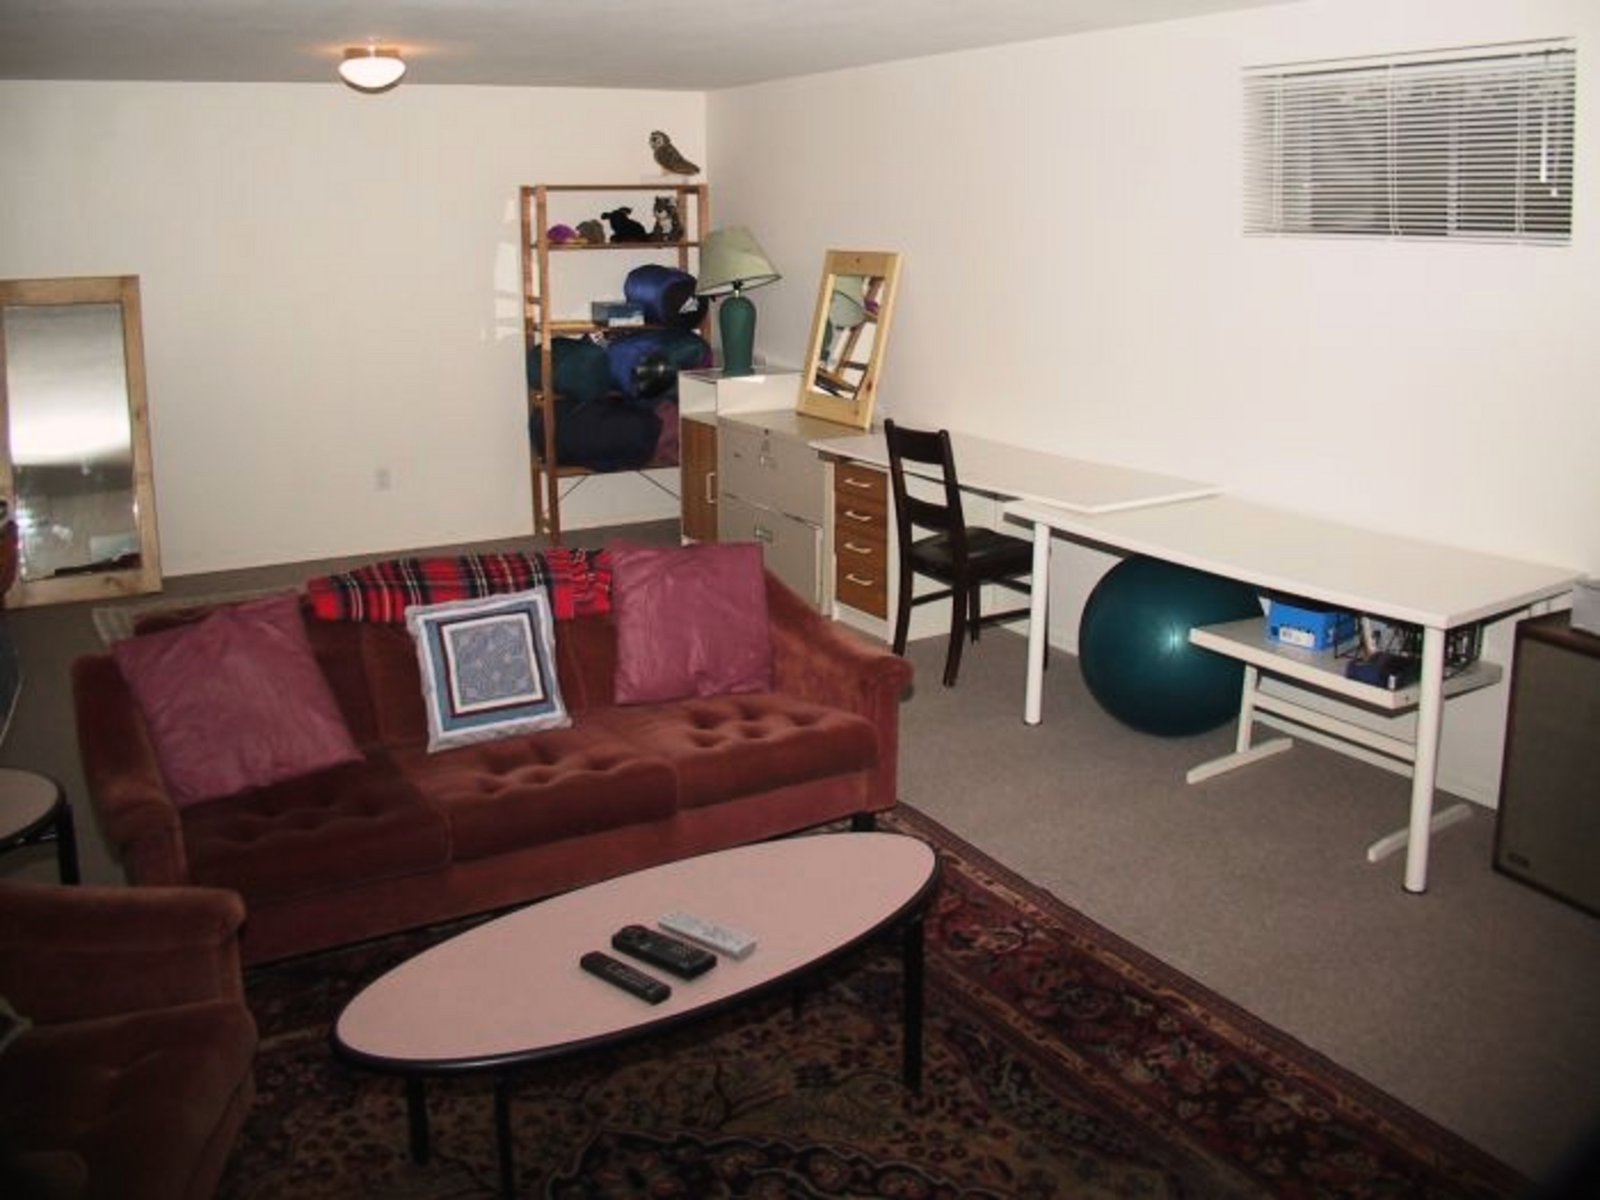 Recreation Room Downstairs